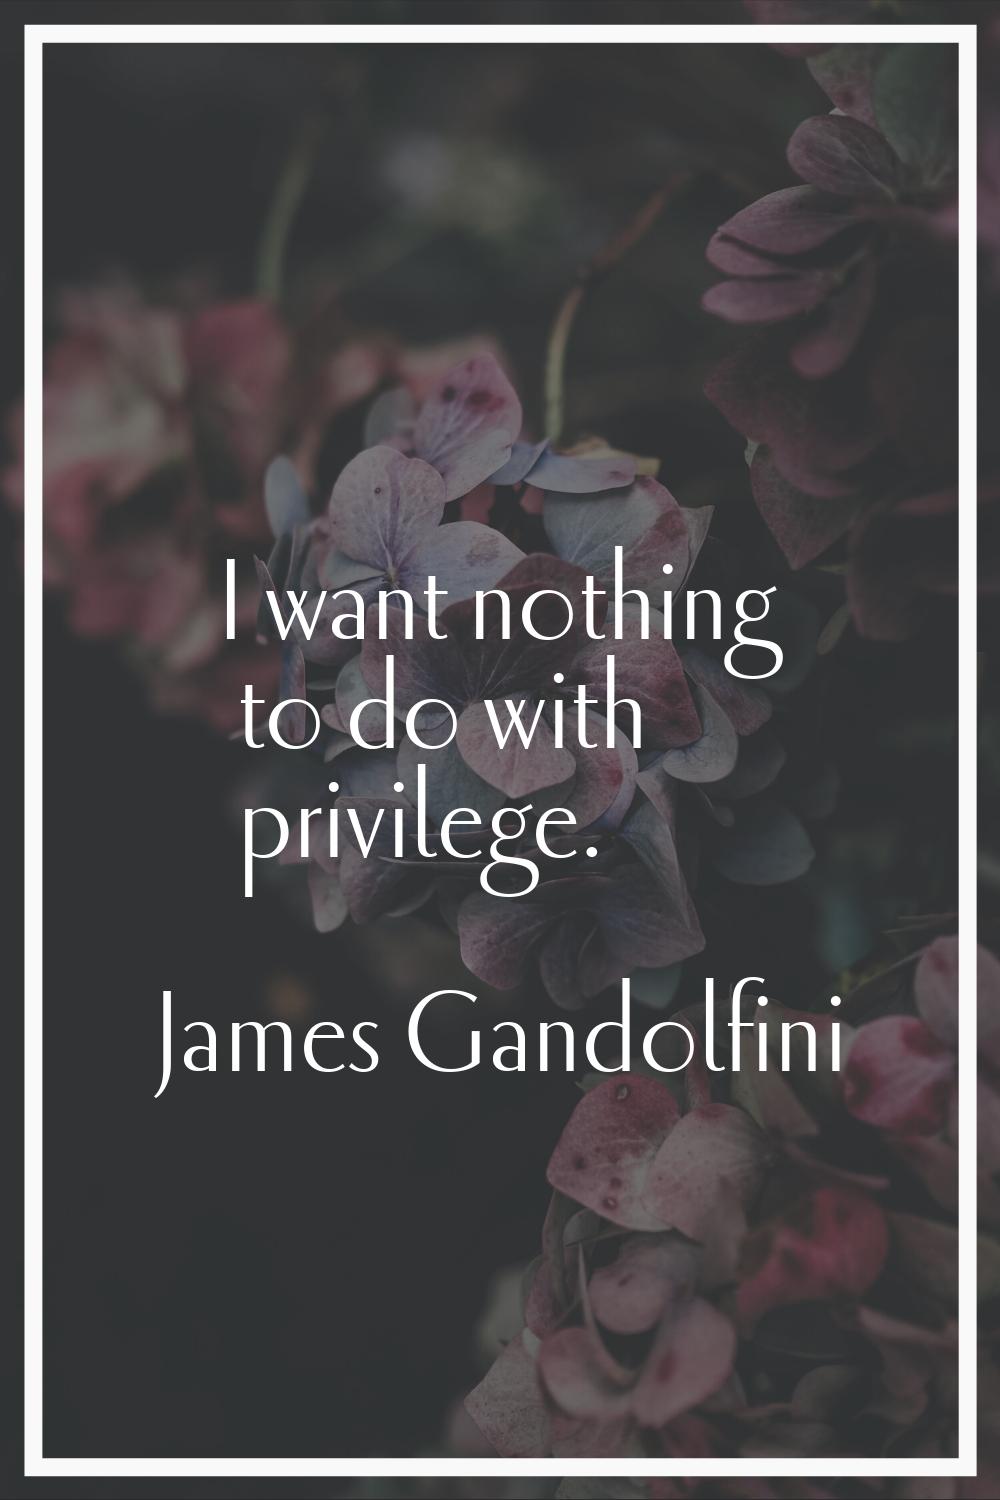 I want nothing to do with privilege.